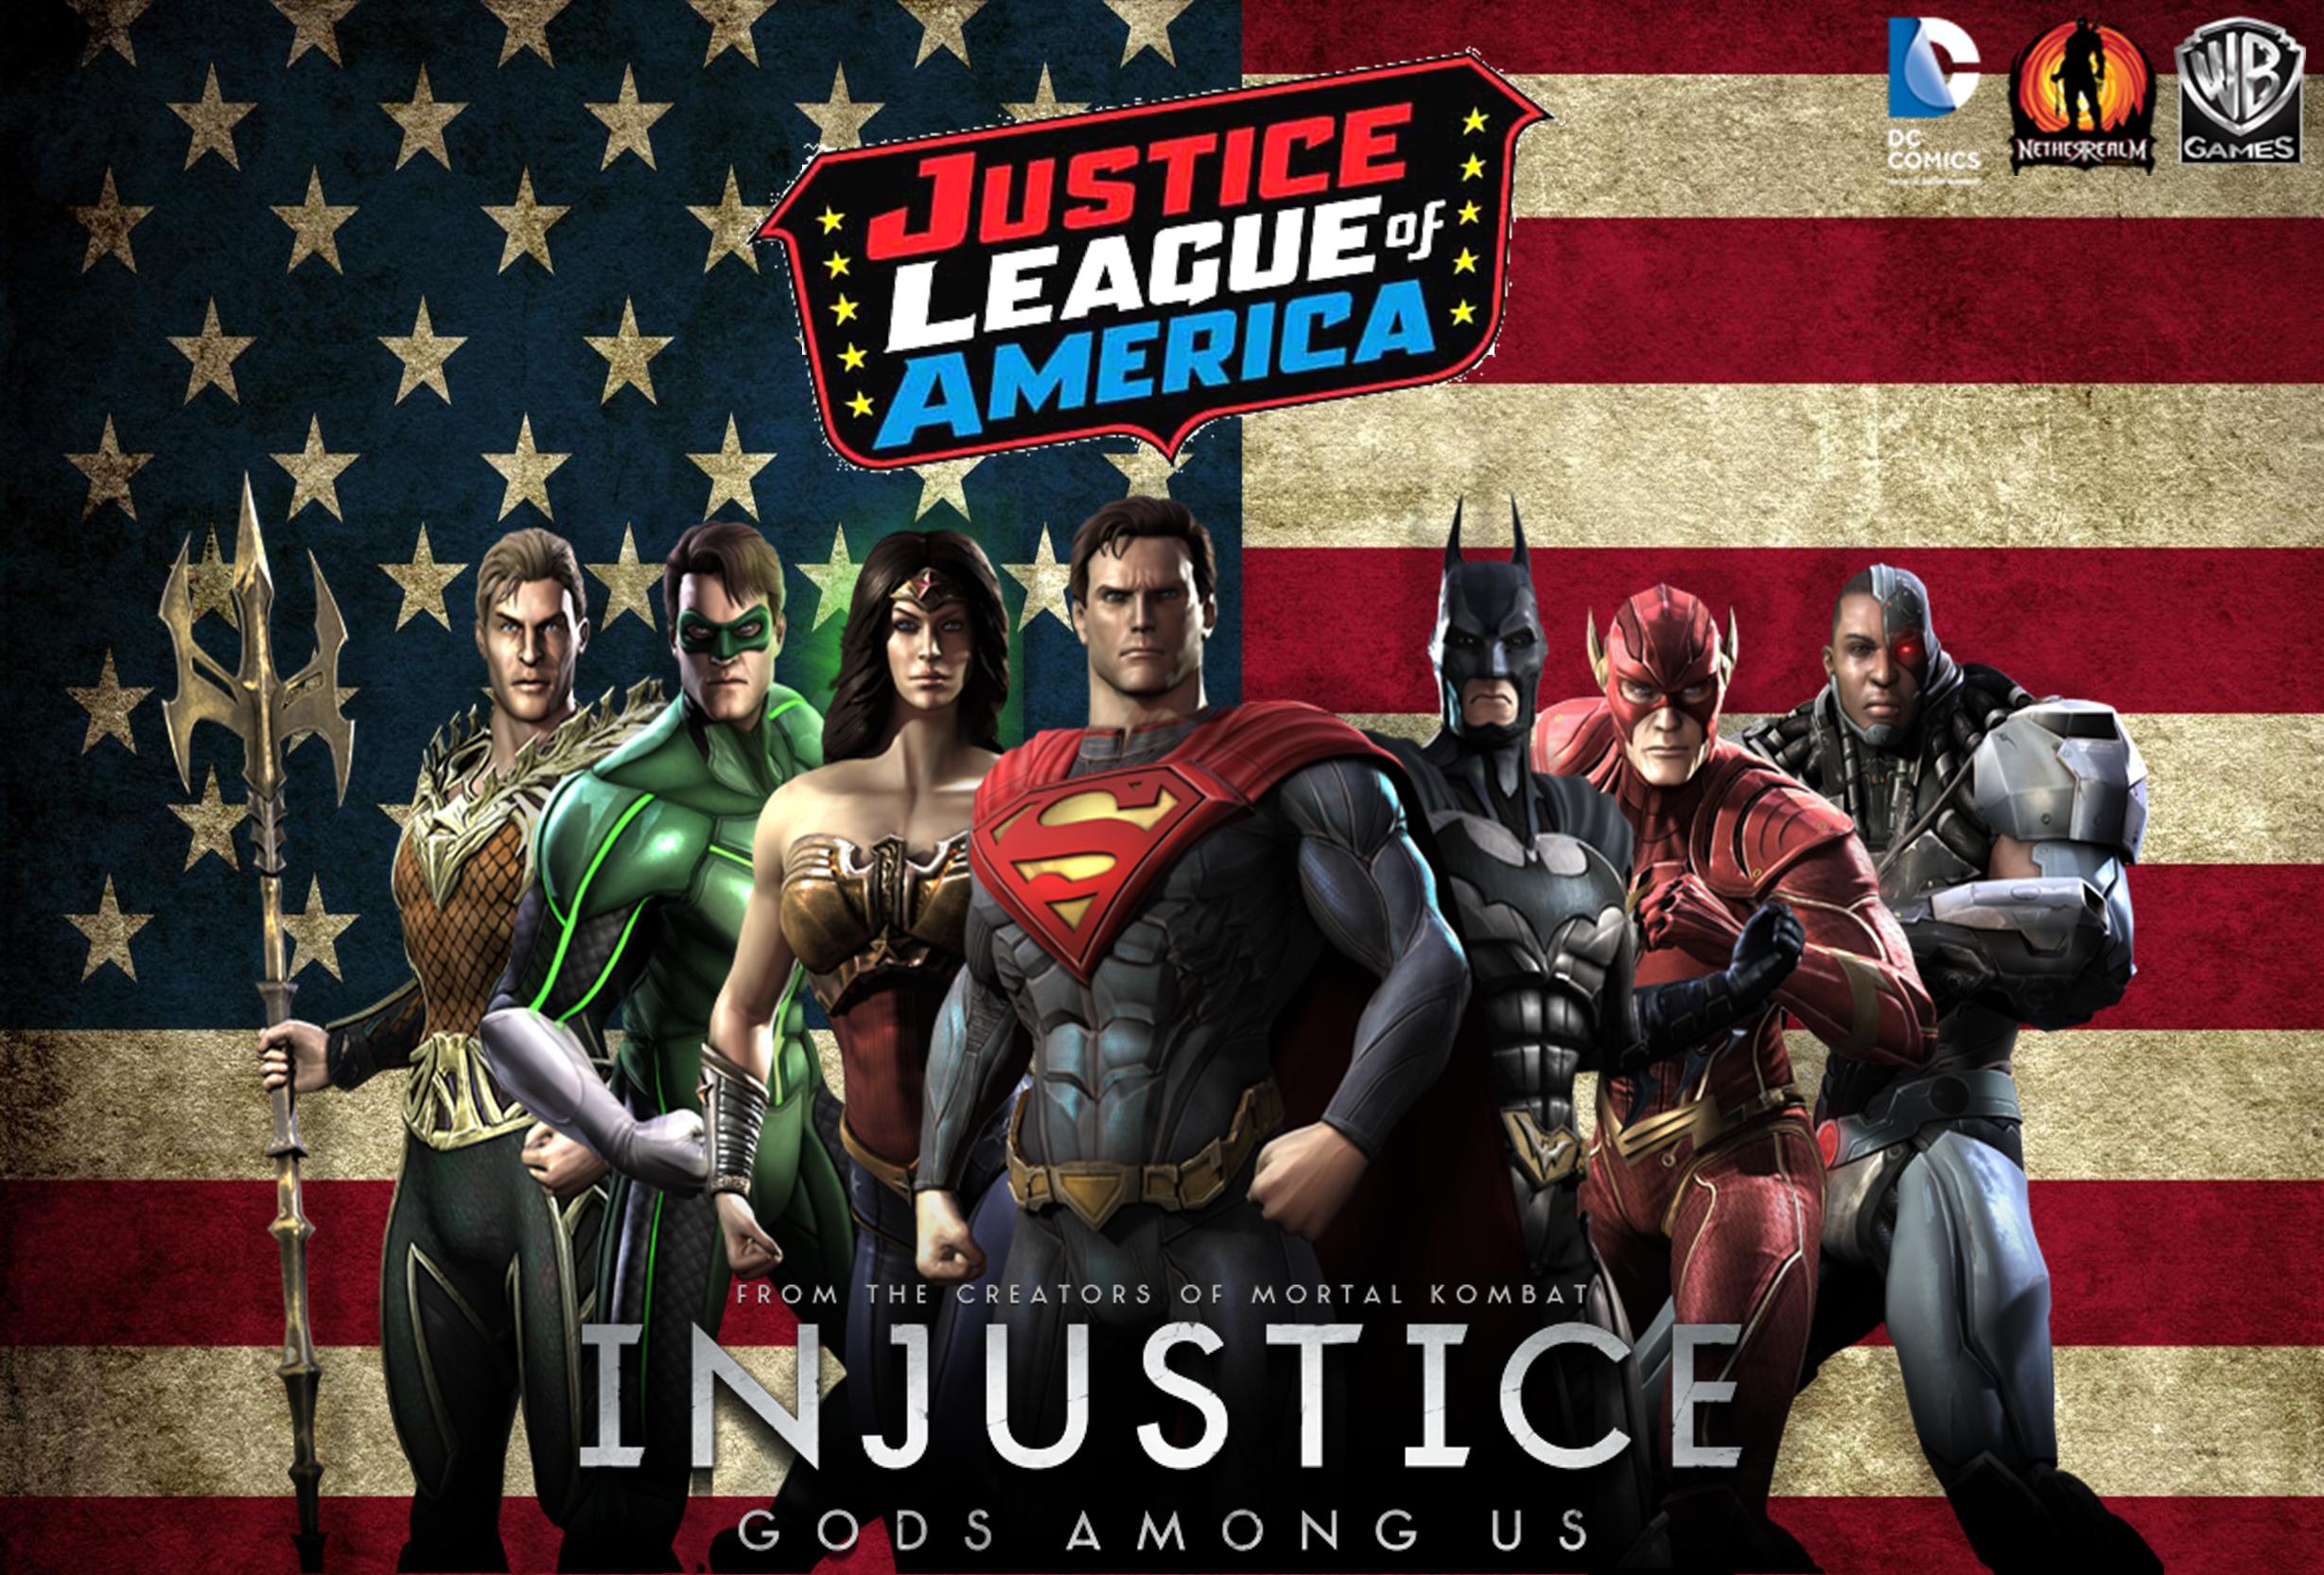 More Like Injustice: Justice League Wallpaper